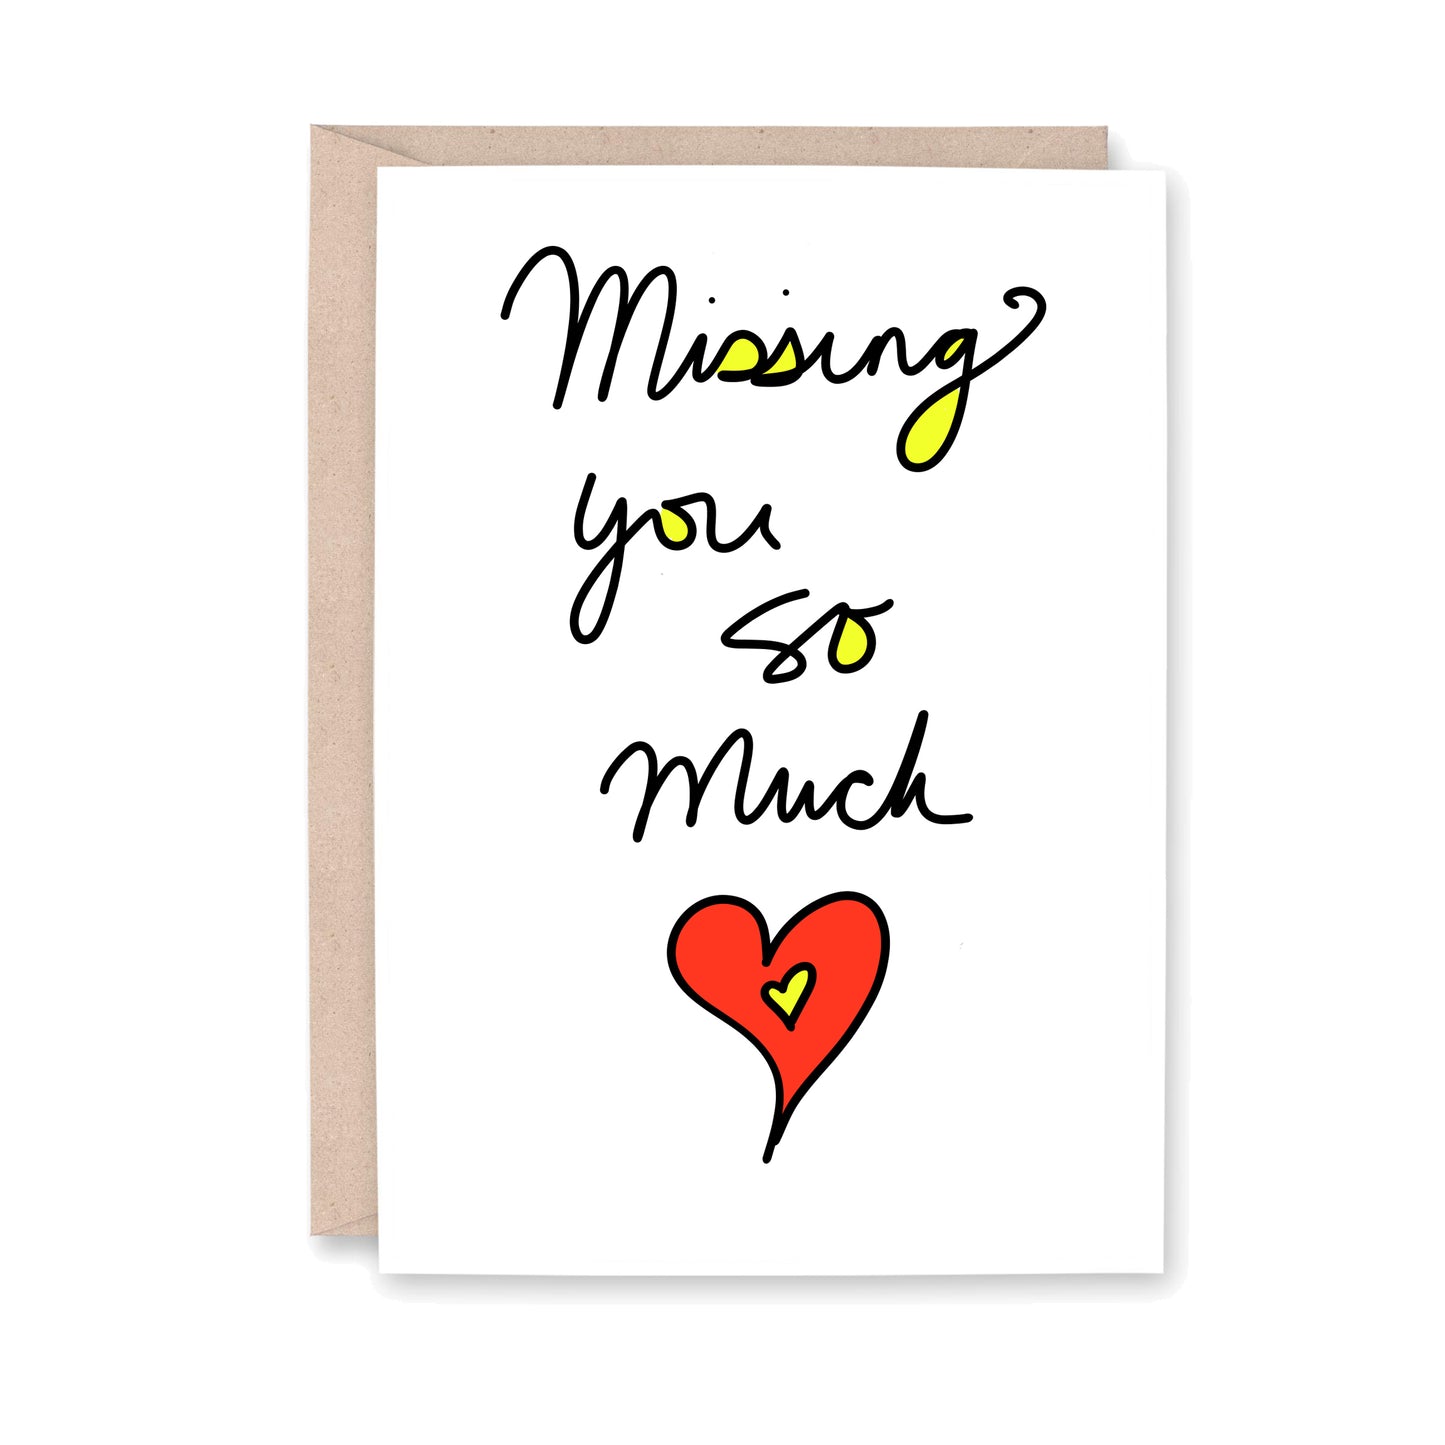 Greeting card that reads: Missing you so much. And below the text there is a red heart and smaller yellow heart inside the red